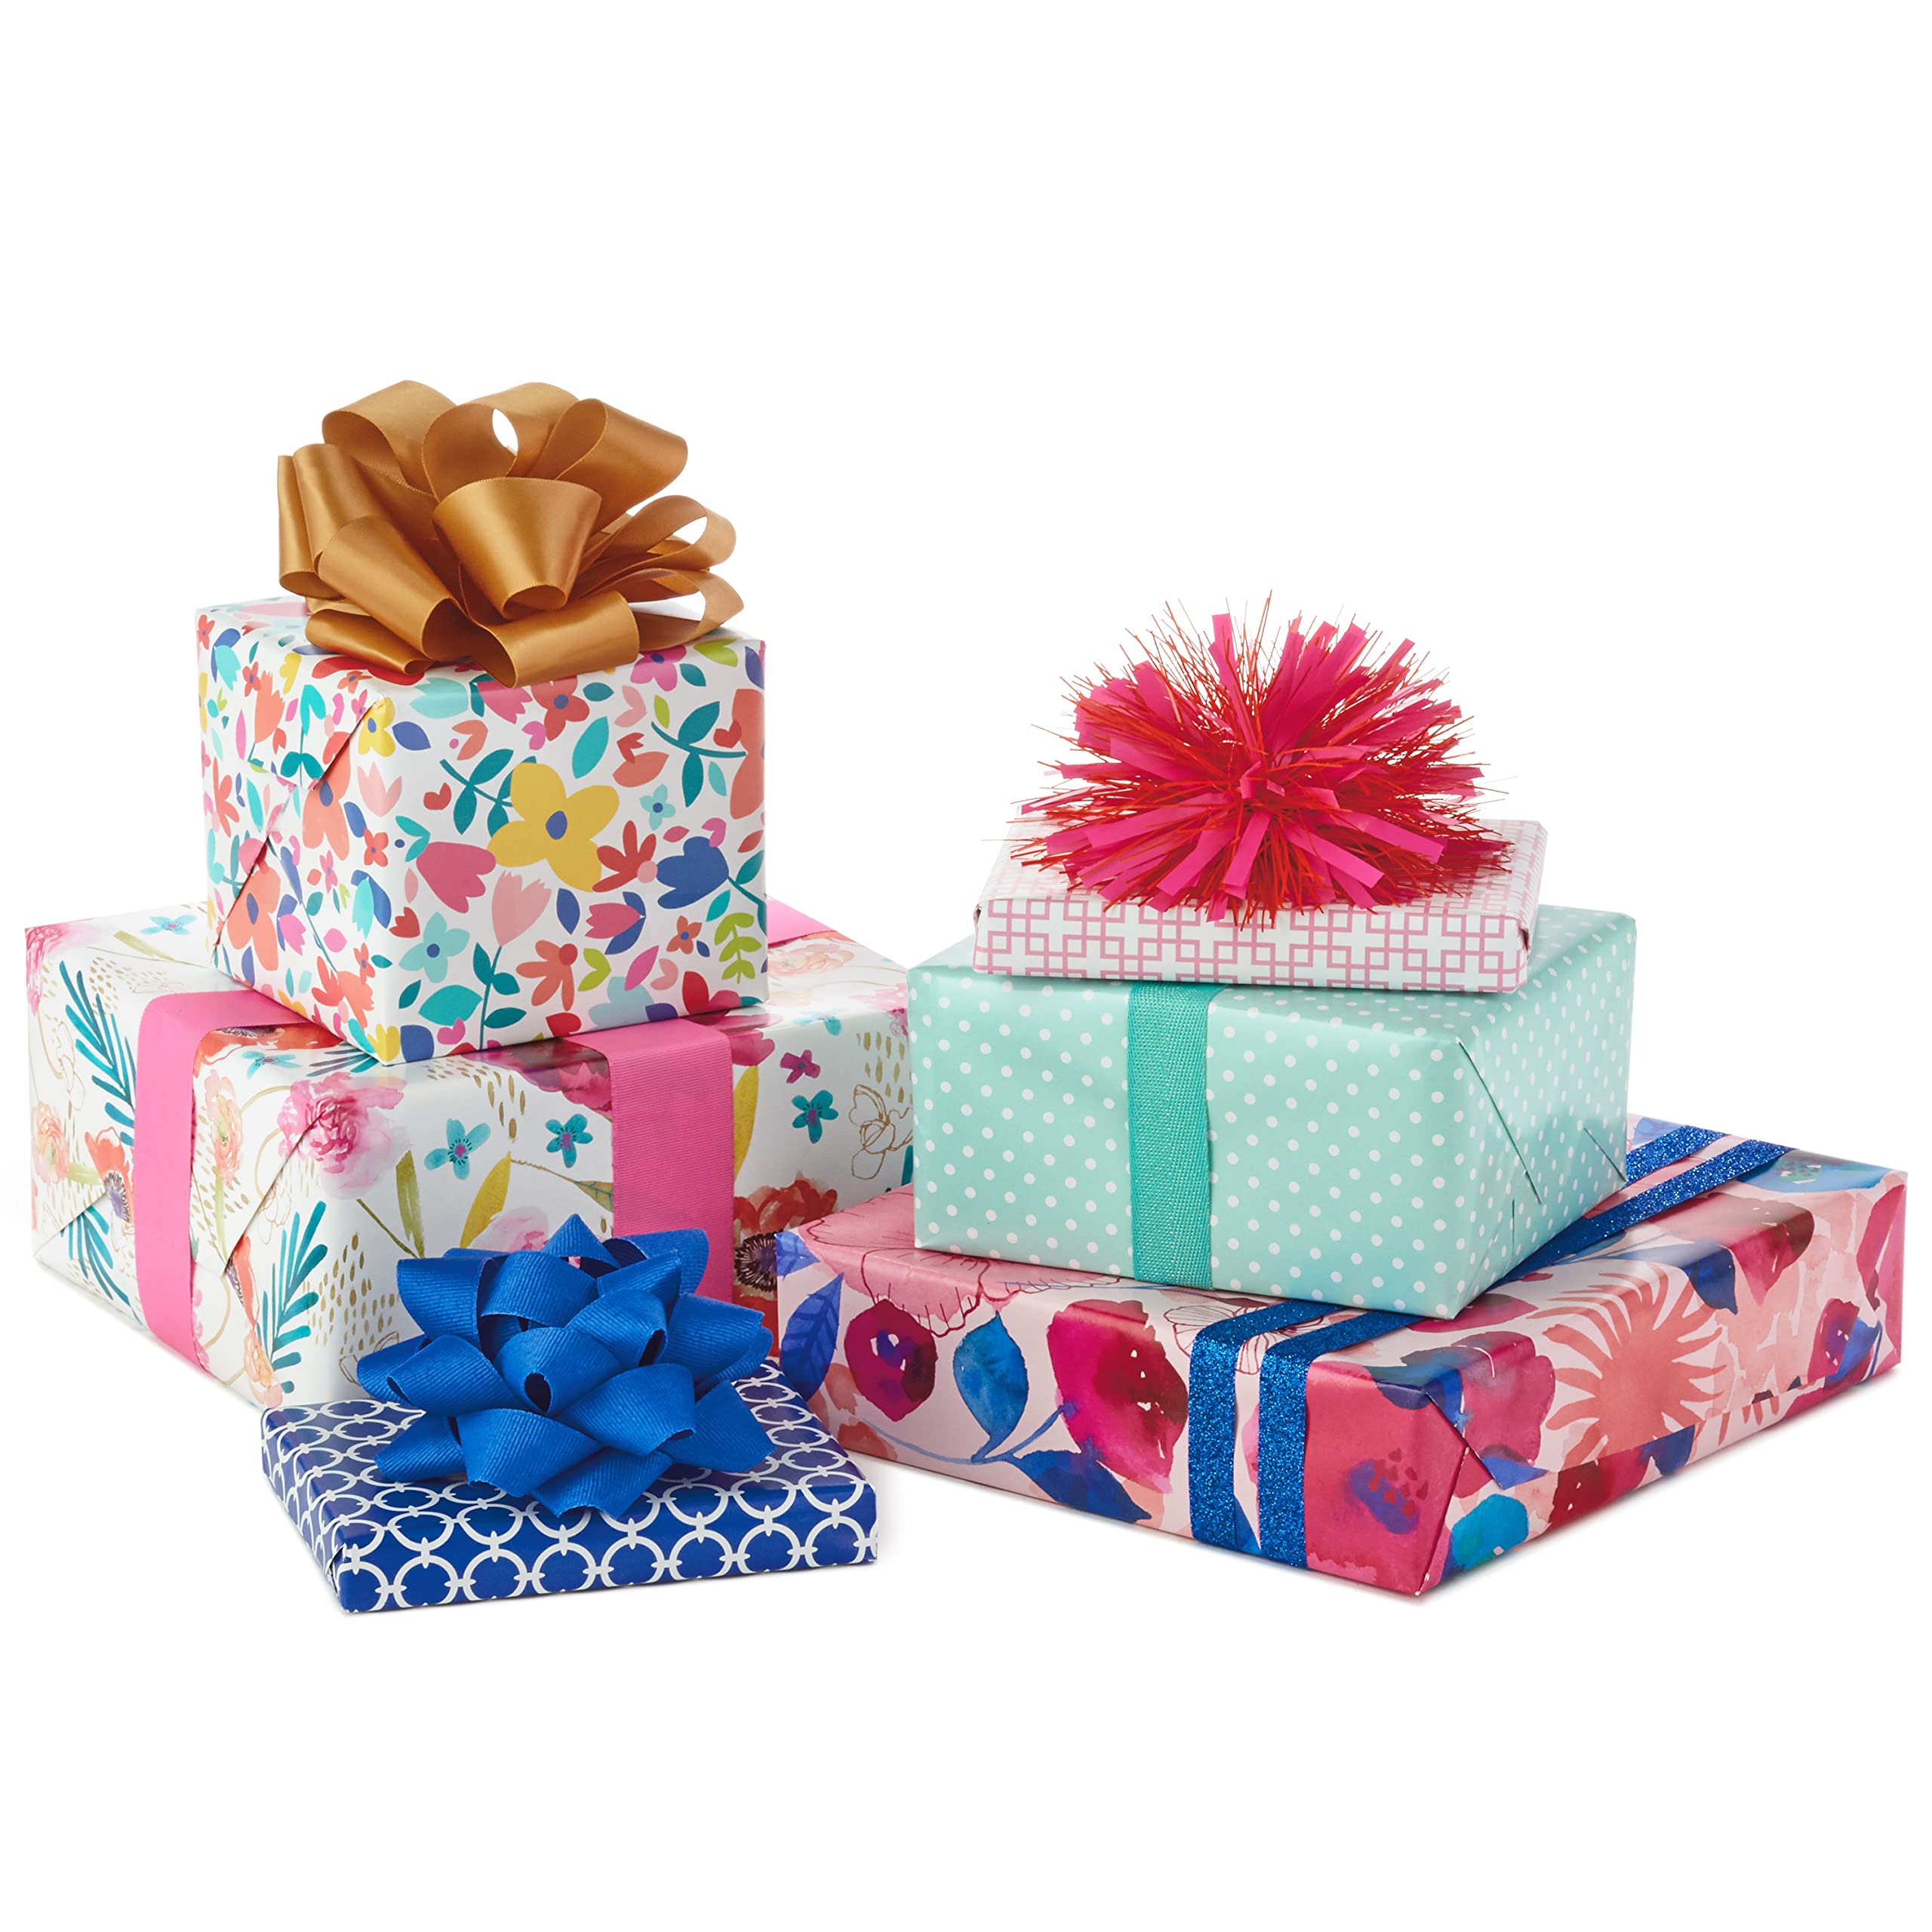 Hallmark Reversible Wrapping Paper Bundle (6 Rolls: 195 Square Feet Total) Flowers & Polka Dots, Black and White, Pink and Blue for Birthdays, Weddings, Valentine's Day, Mother's Day, Baby Shower